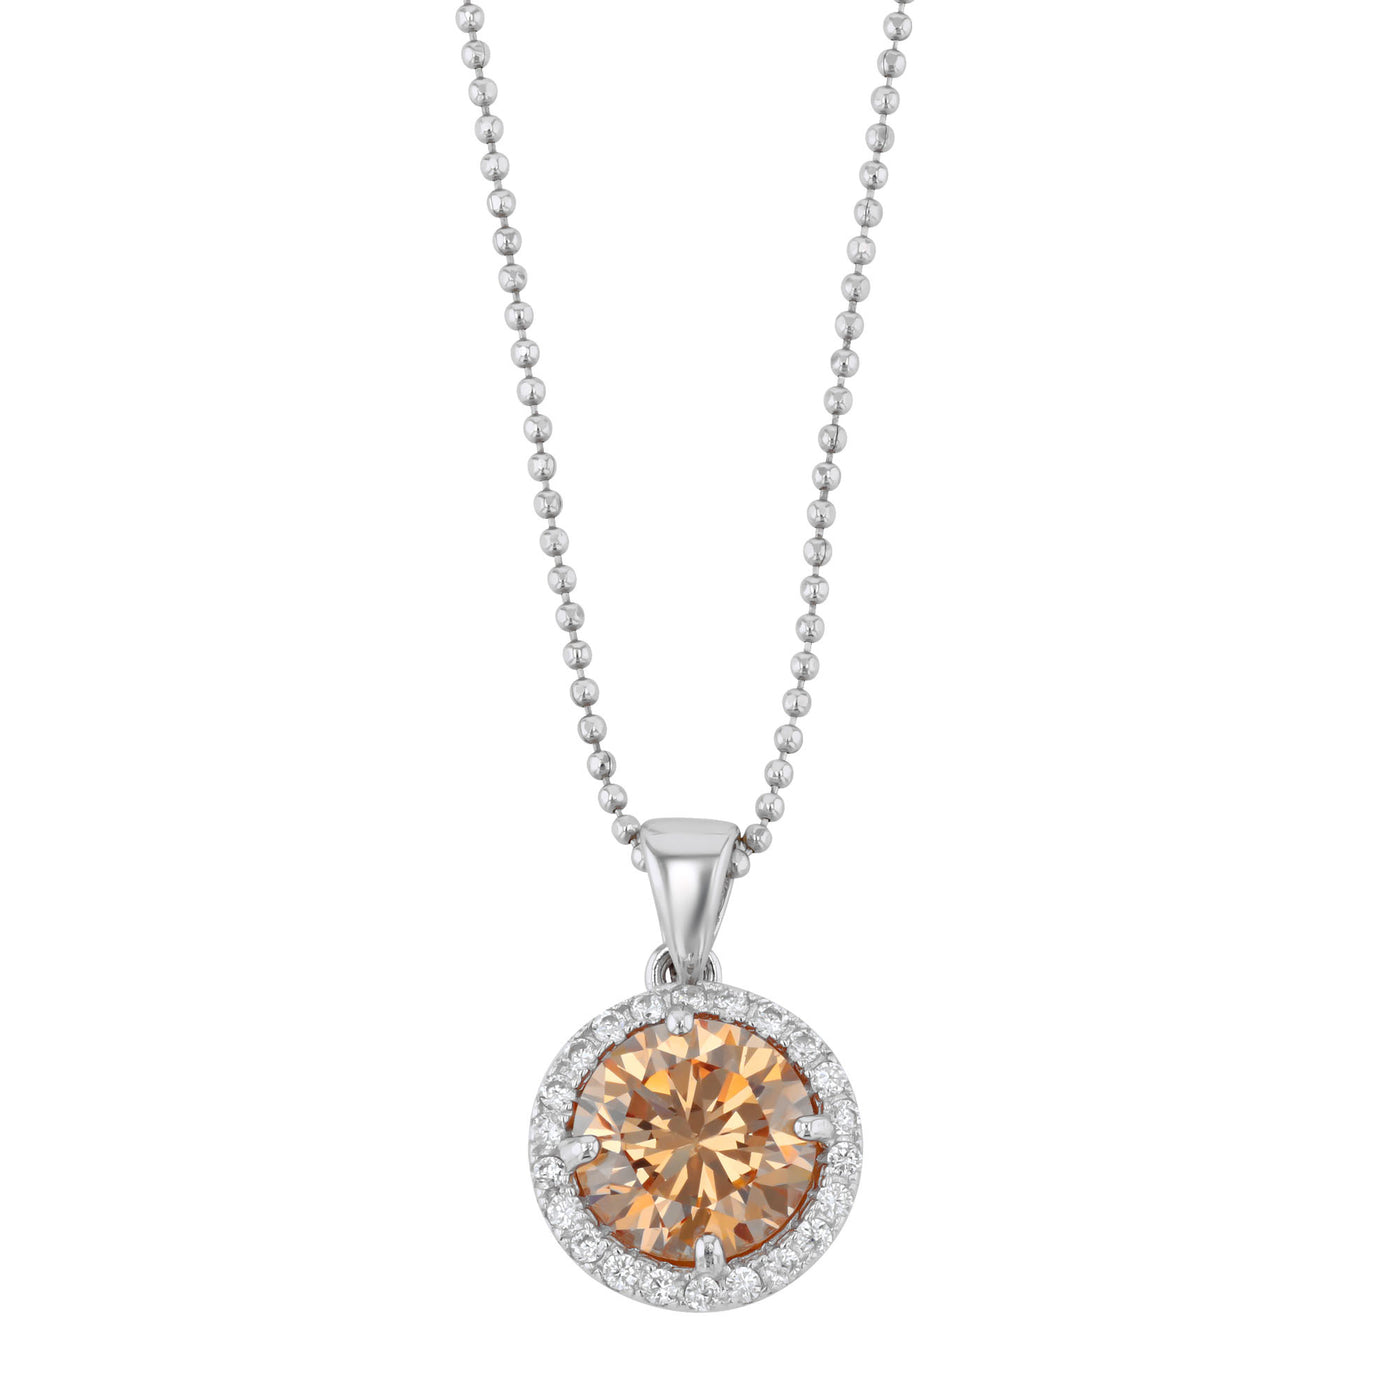 Rebecca Sloane Silver Circle With Faceted Champagne CZ Pendant